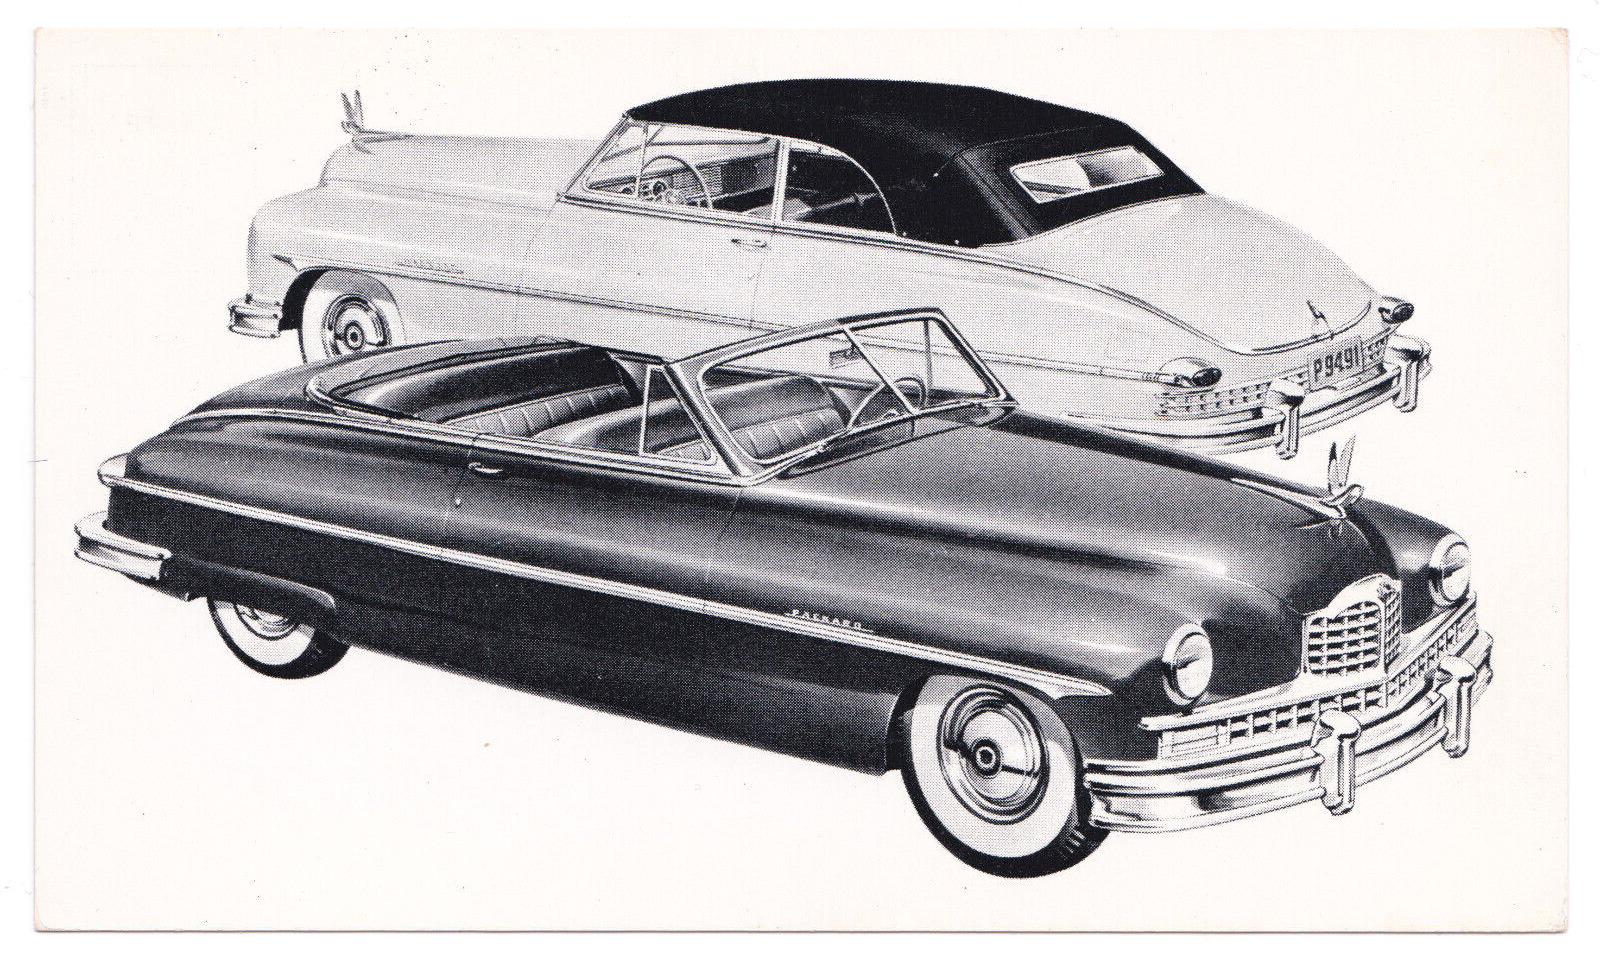 Packard Convertible Automobile Two Late 1940s Cars B&W Lithograph Postcard